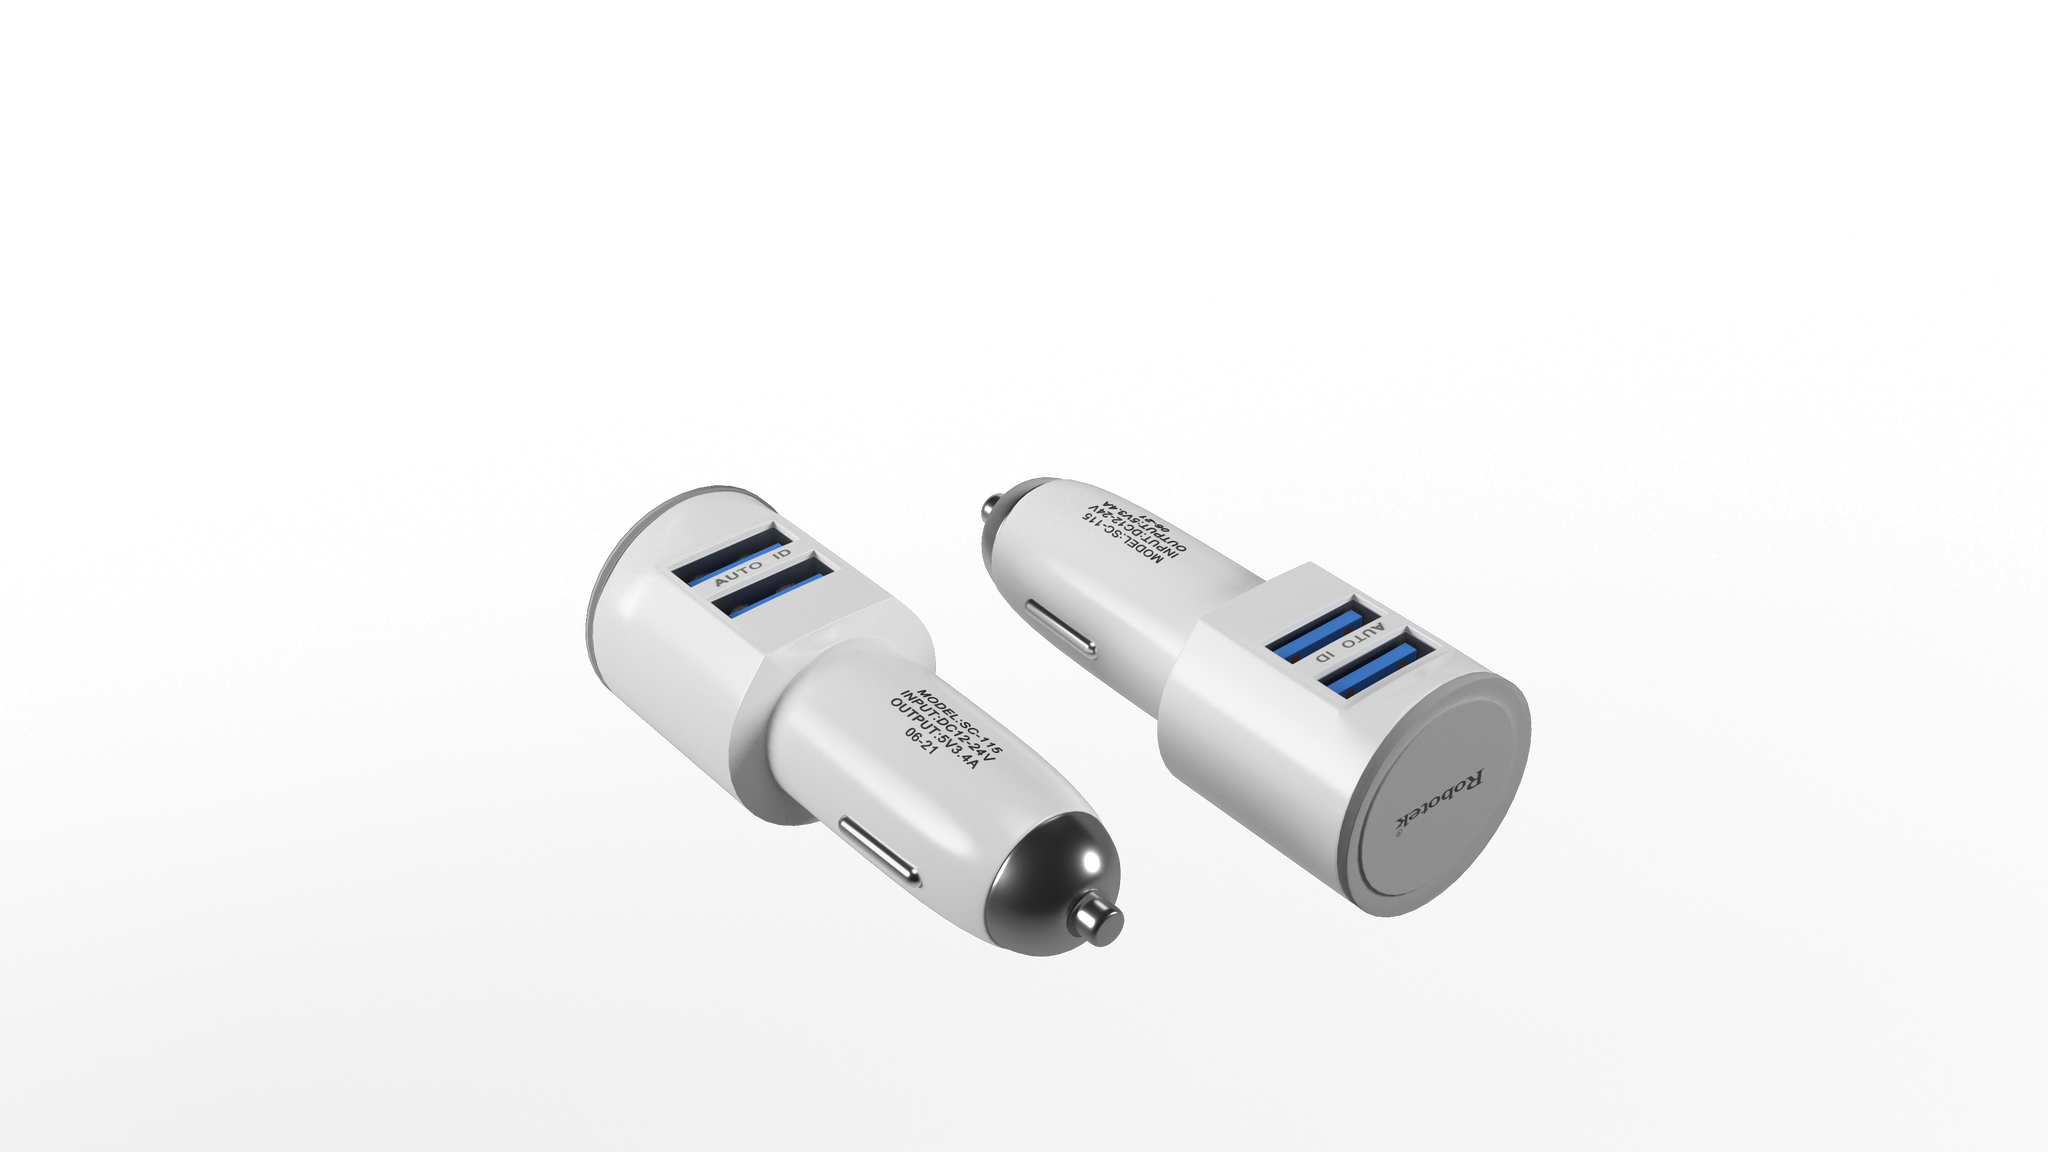 Car Charger SC-115 with USB Data Cable